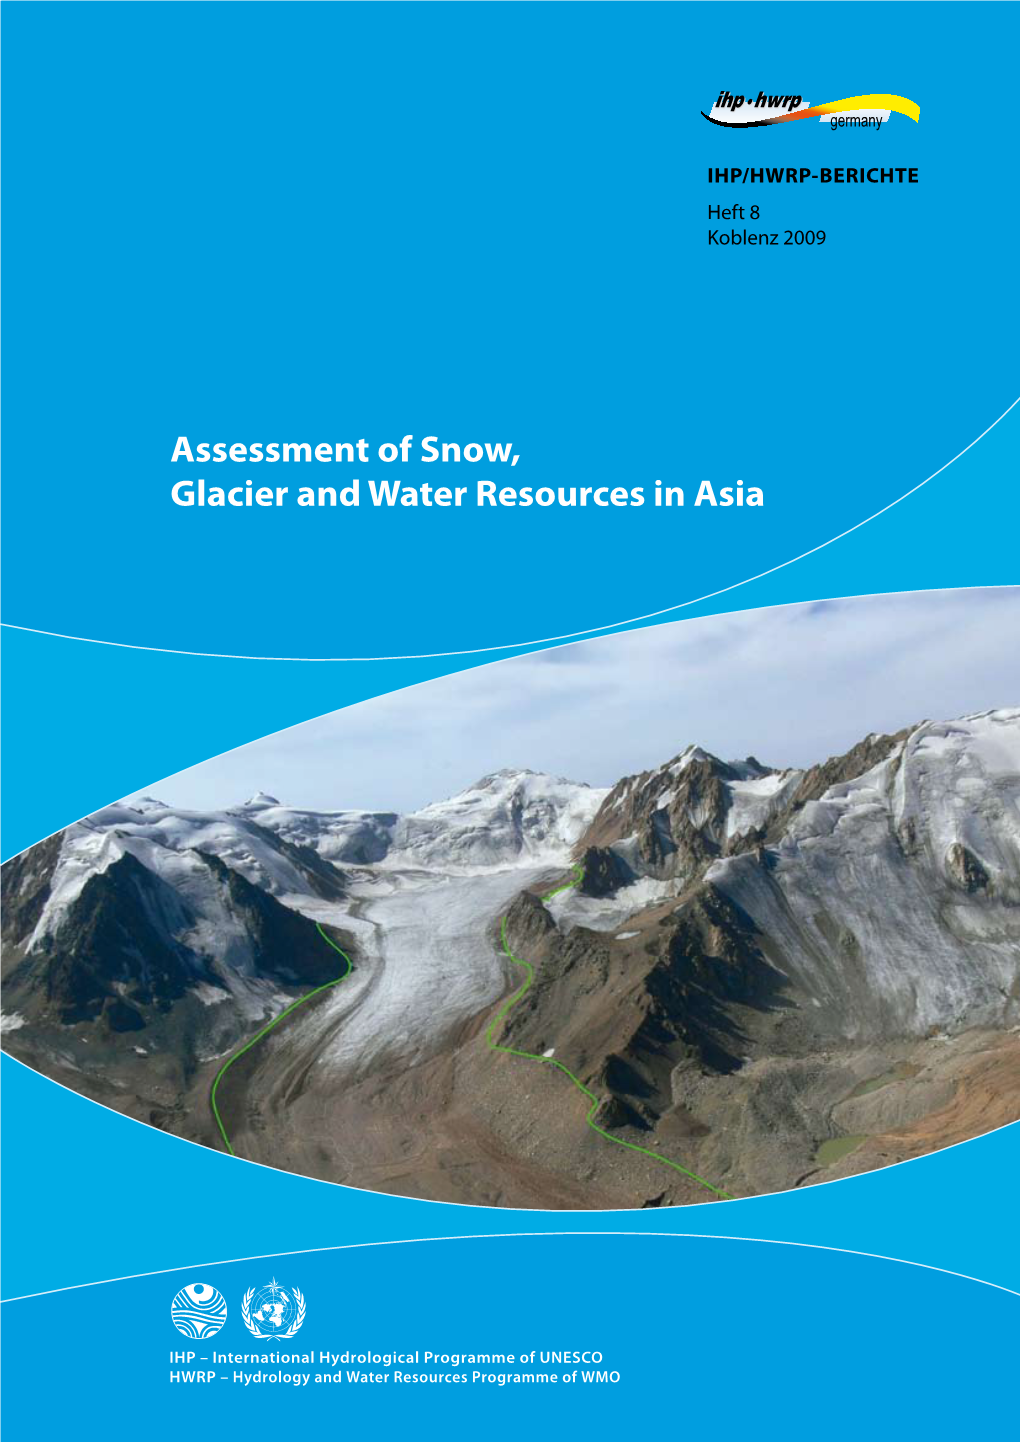 Assessment of Snow, Glacier and Water Resources in Asia